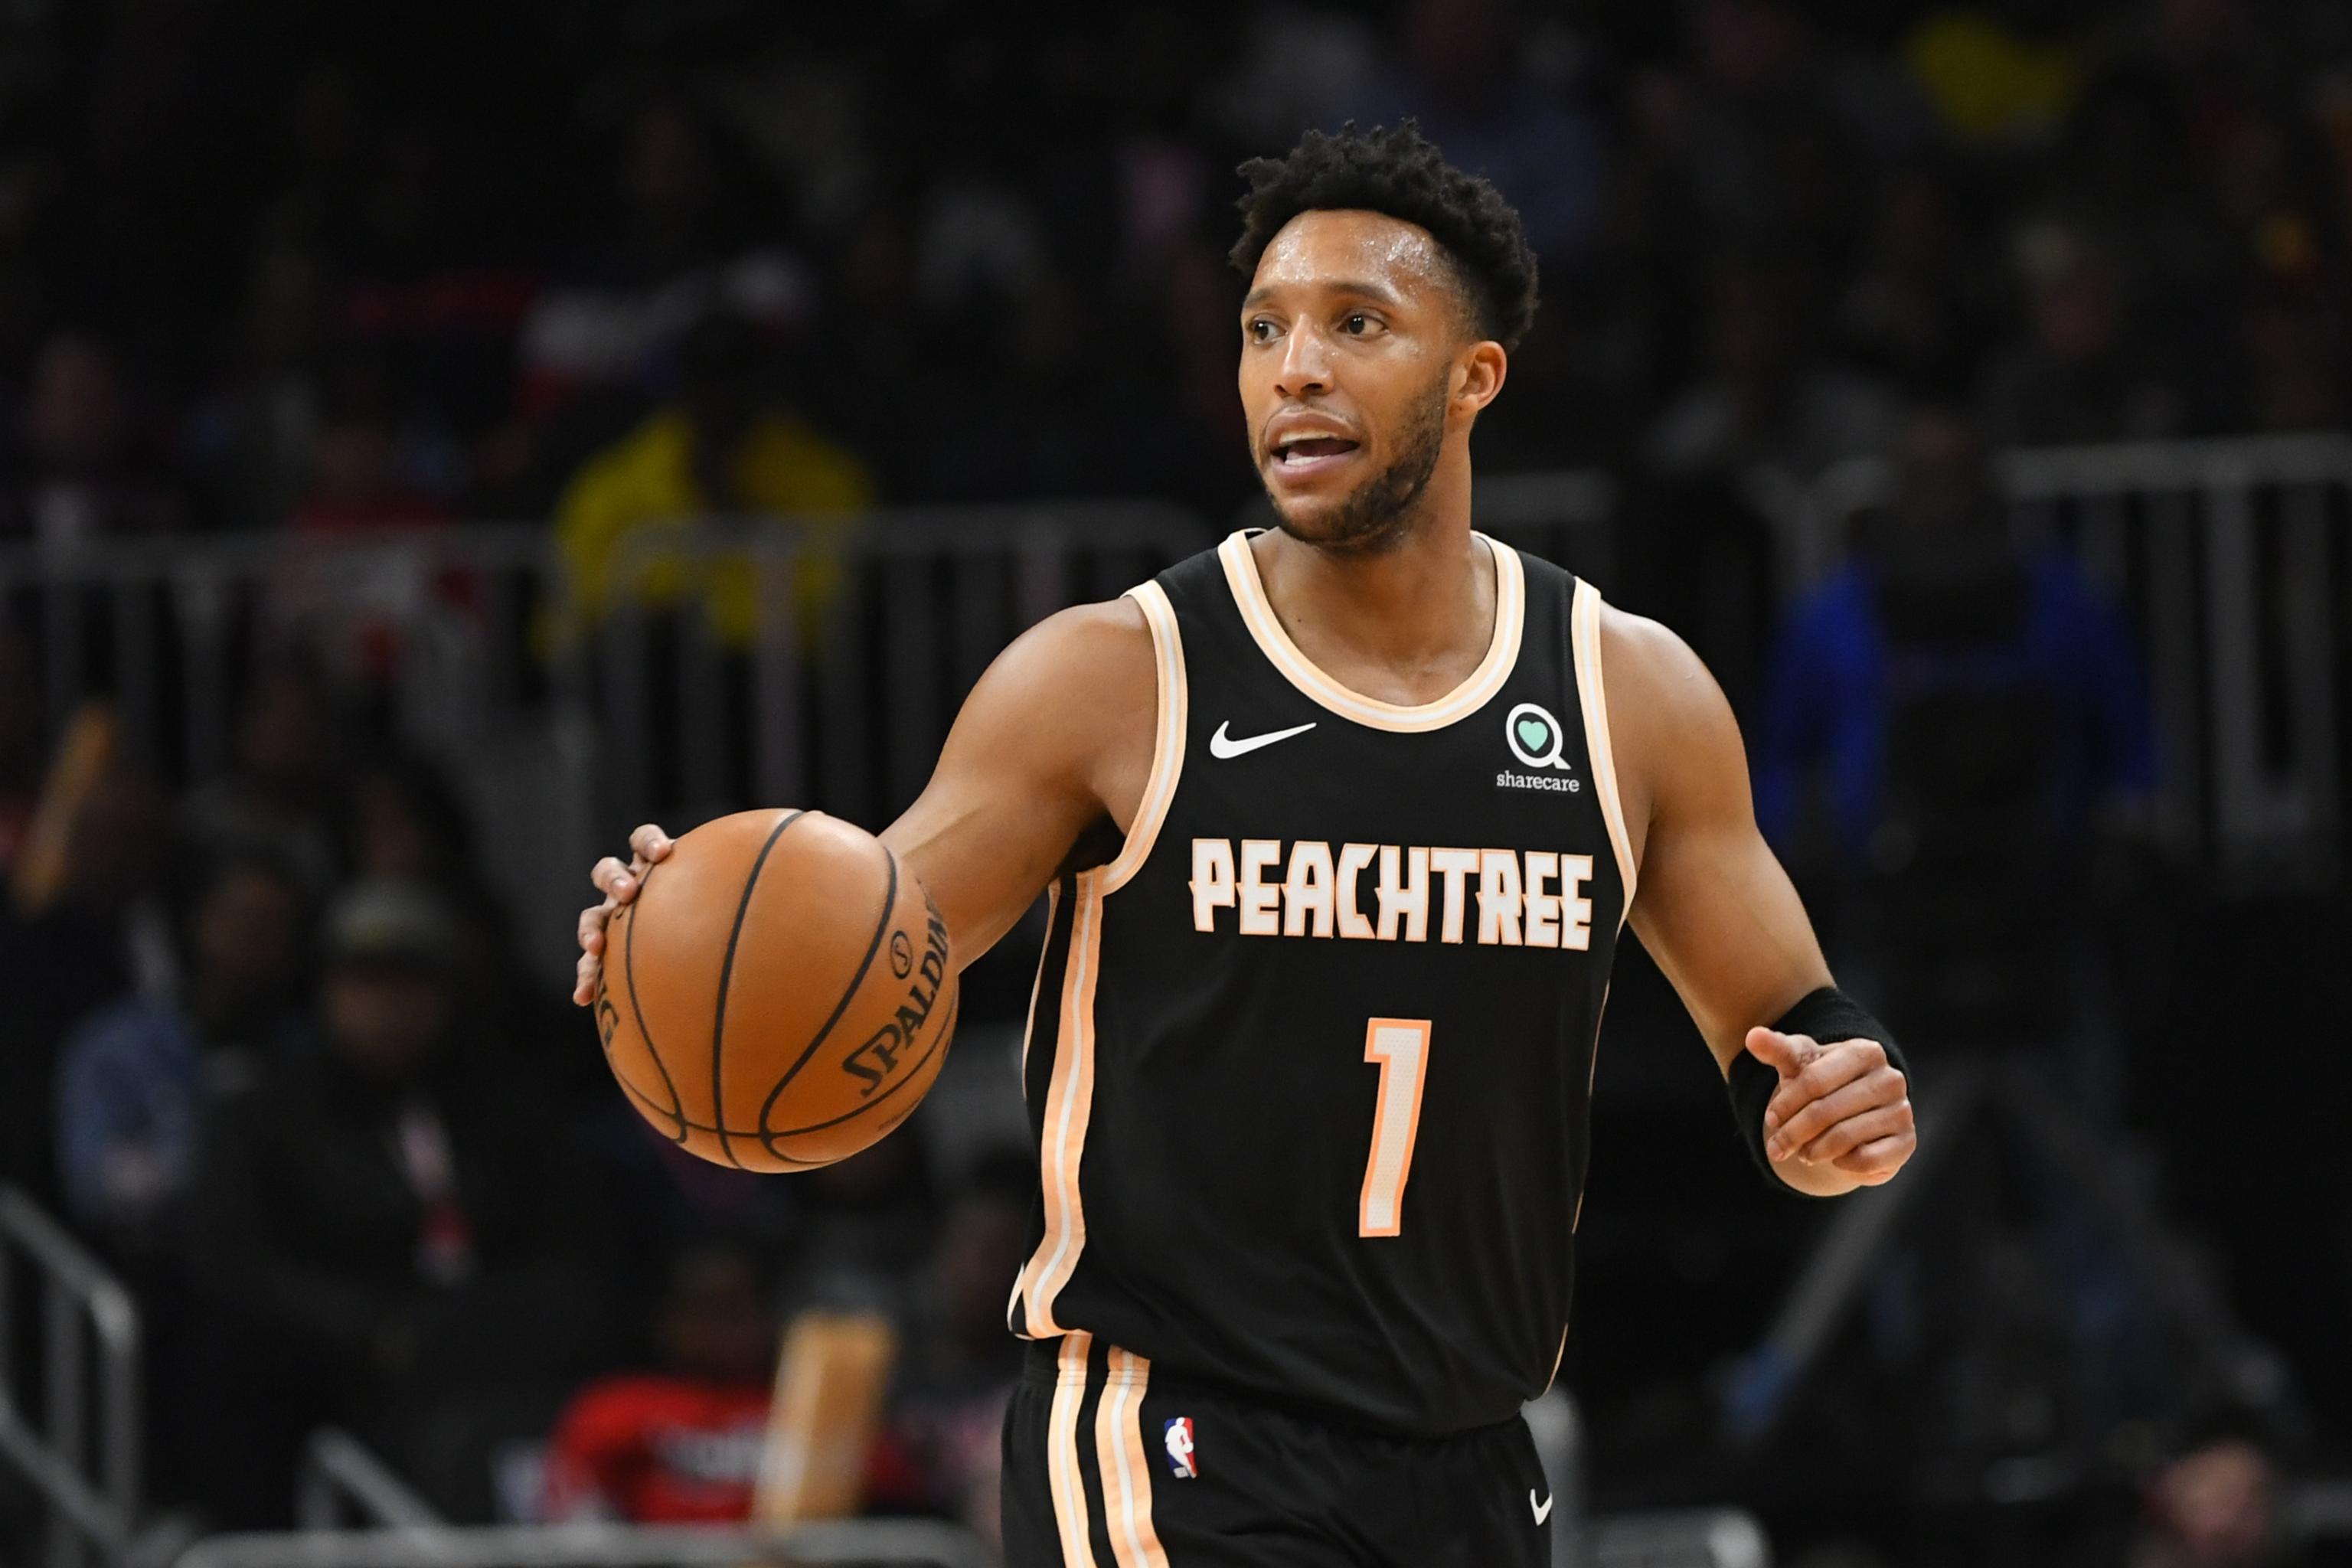 Nba Rumors Evan Turner Interests Celtics Heat If Bought Out By Timberwolves Bleacher Report Latest News Videos And Highlights